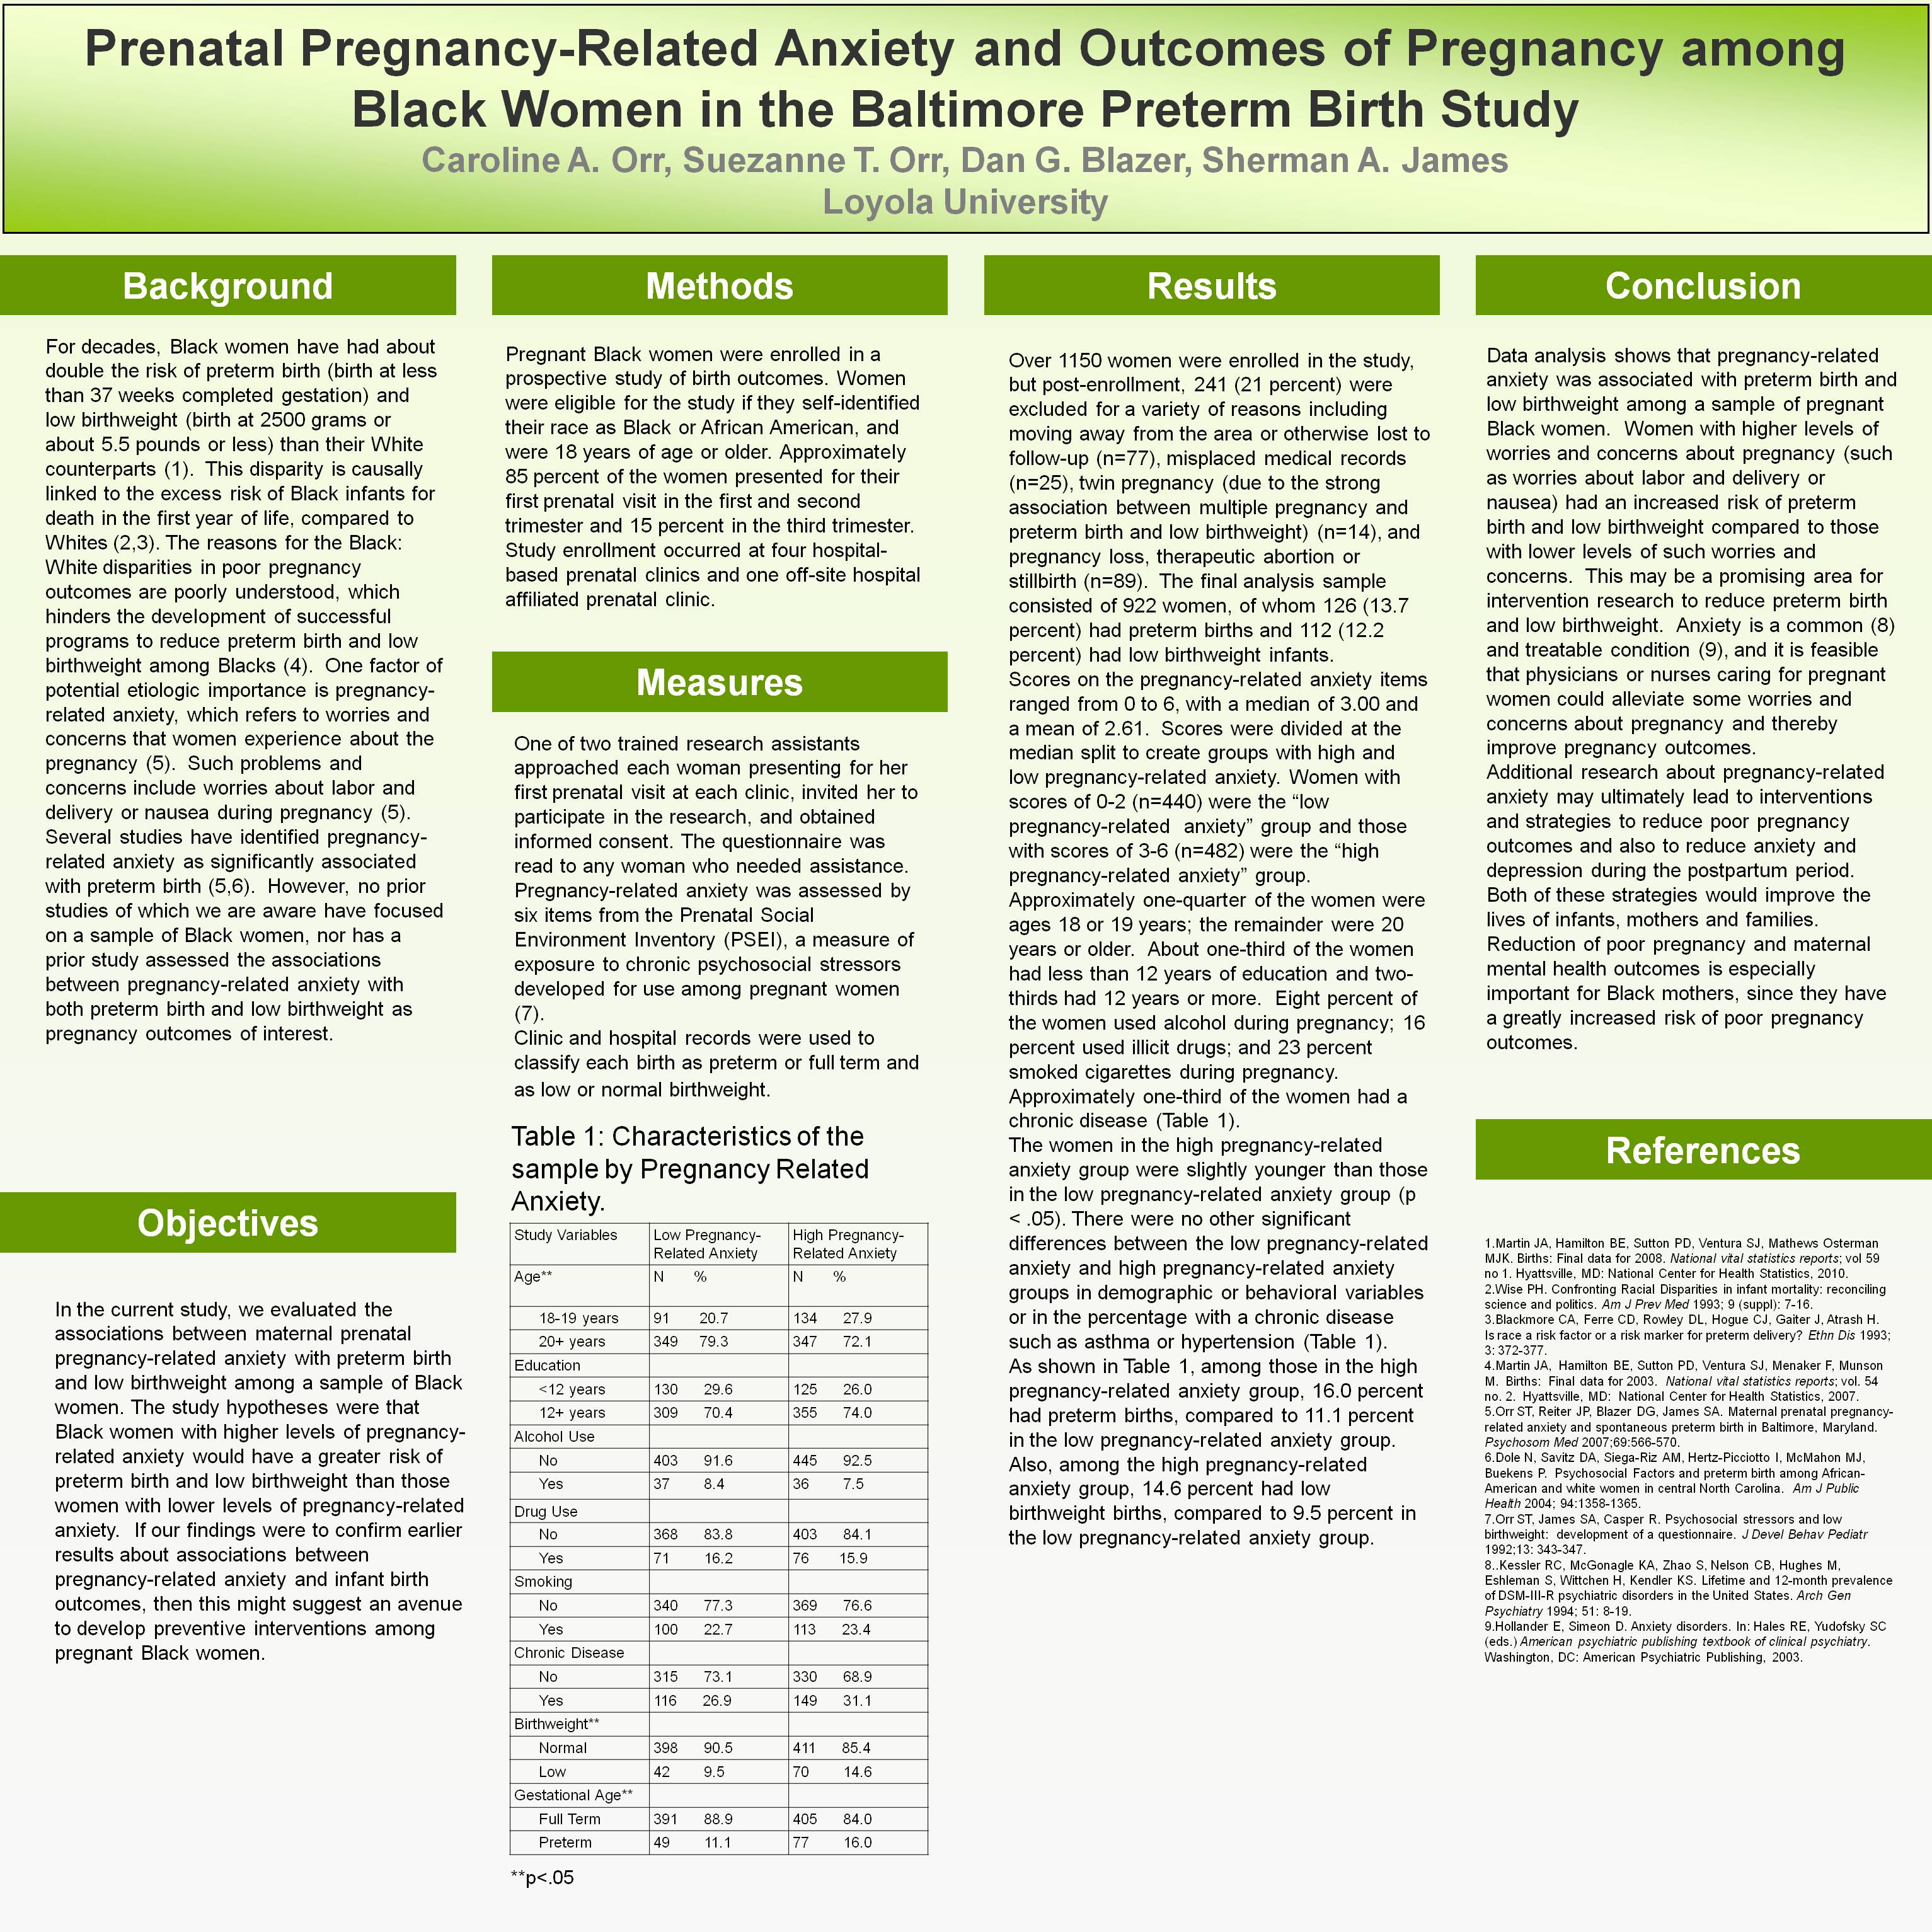 Poster image: Prenatal Pregnancy-Related Anxiety and Outcomes of Pregnancy among Black Women in the Baltimore Preterm Birth Study